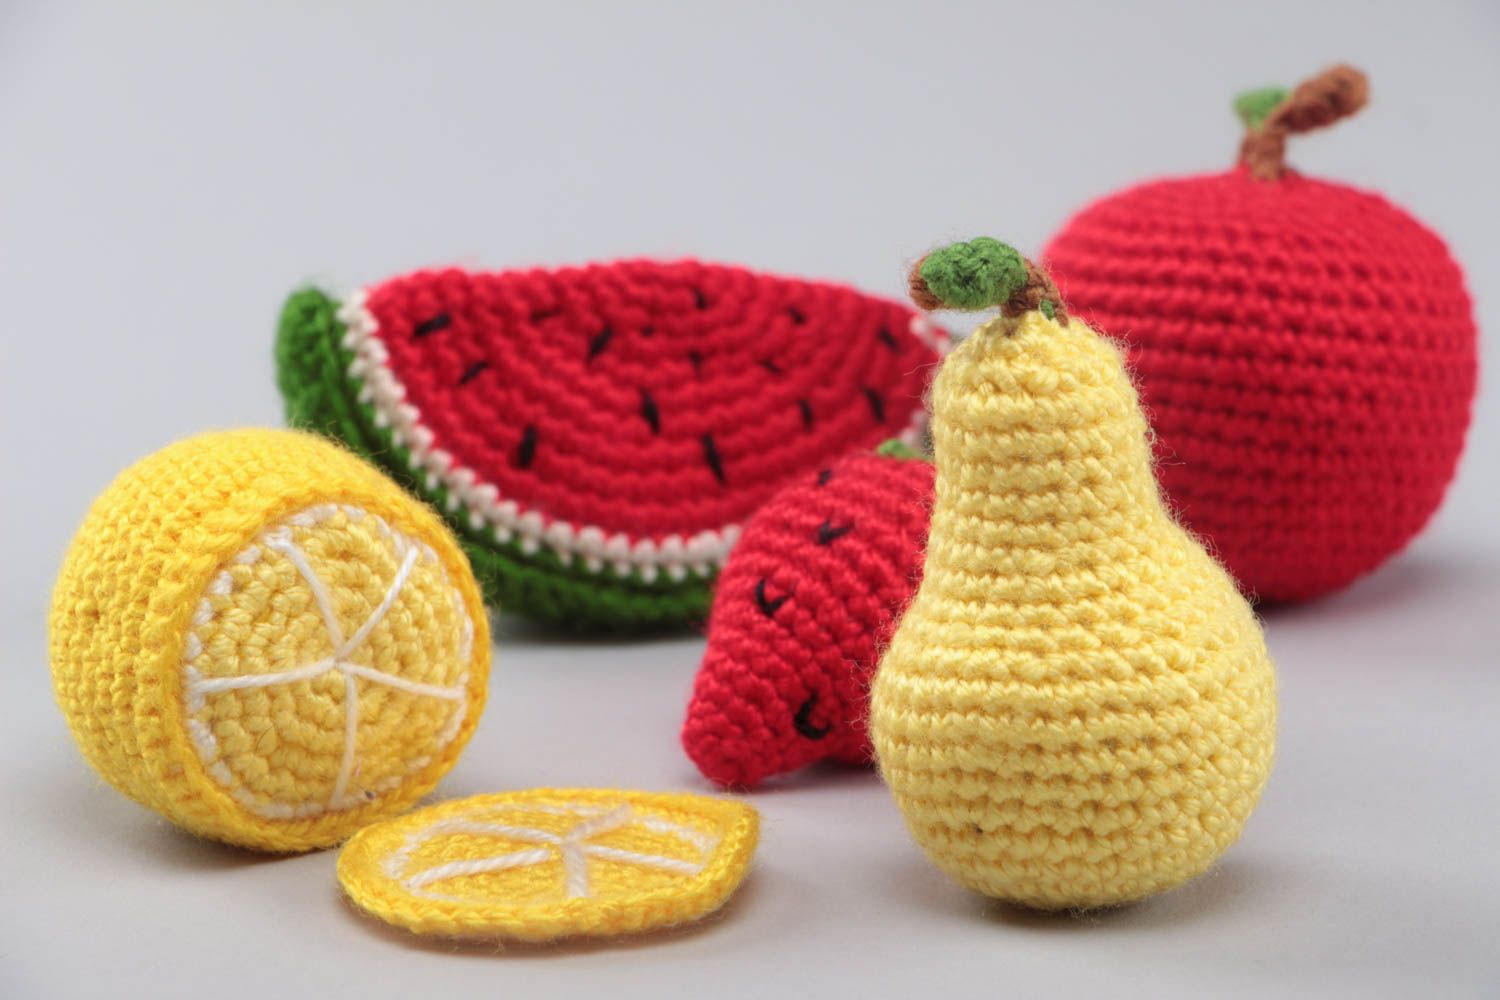 Set of 6 handmade crocheted soft colorful fruit toys for kids and interior decor photo 4